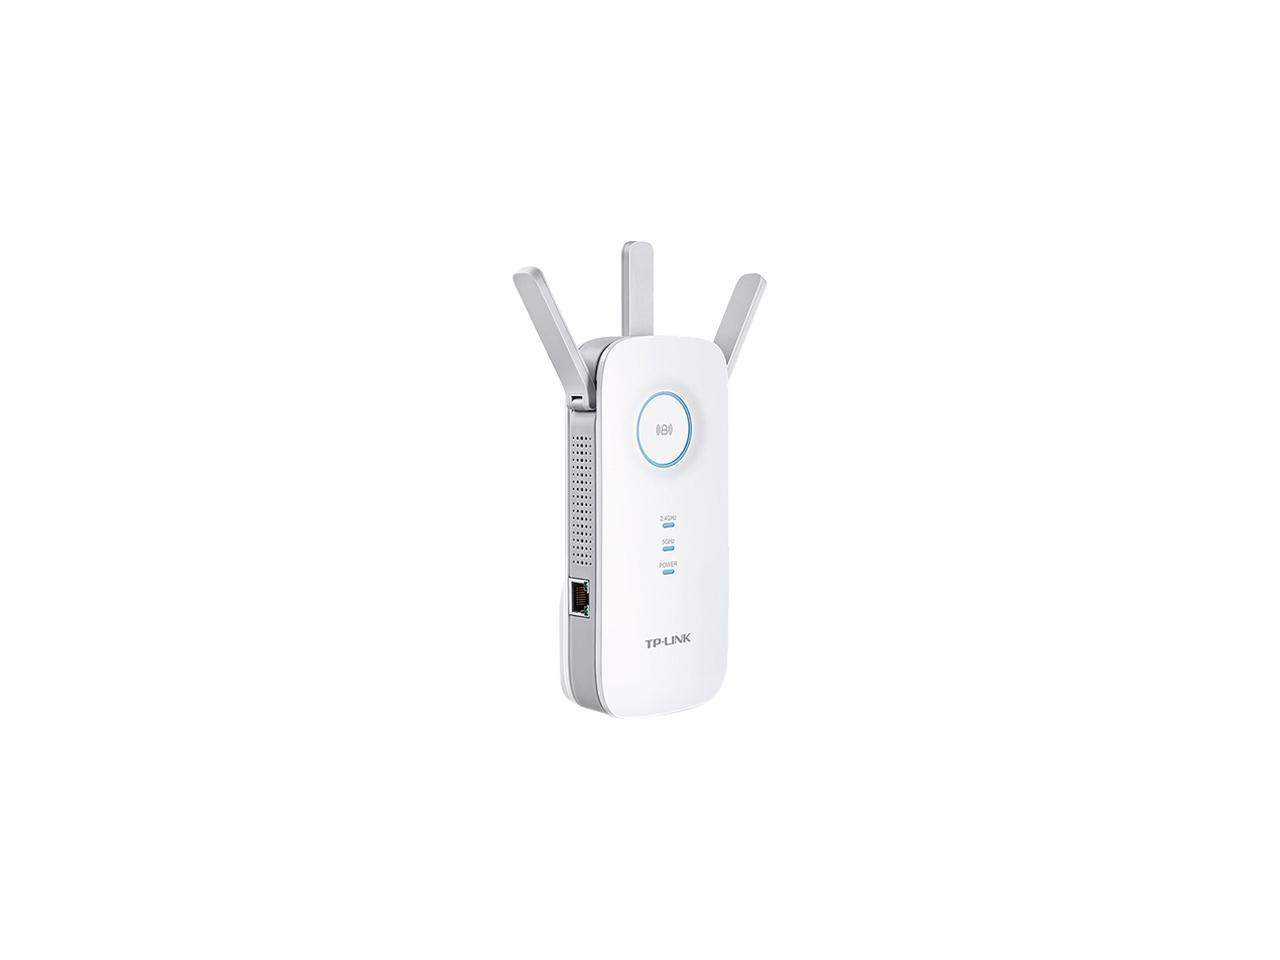 TP-Link Network RE450 AC1750 Wi-Fi Range Extender 1750Mbps with 802.11ac/b/g/n